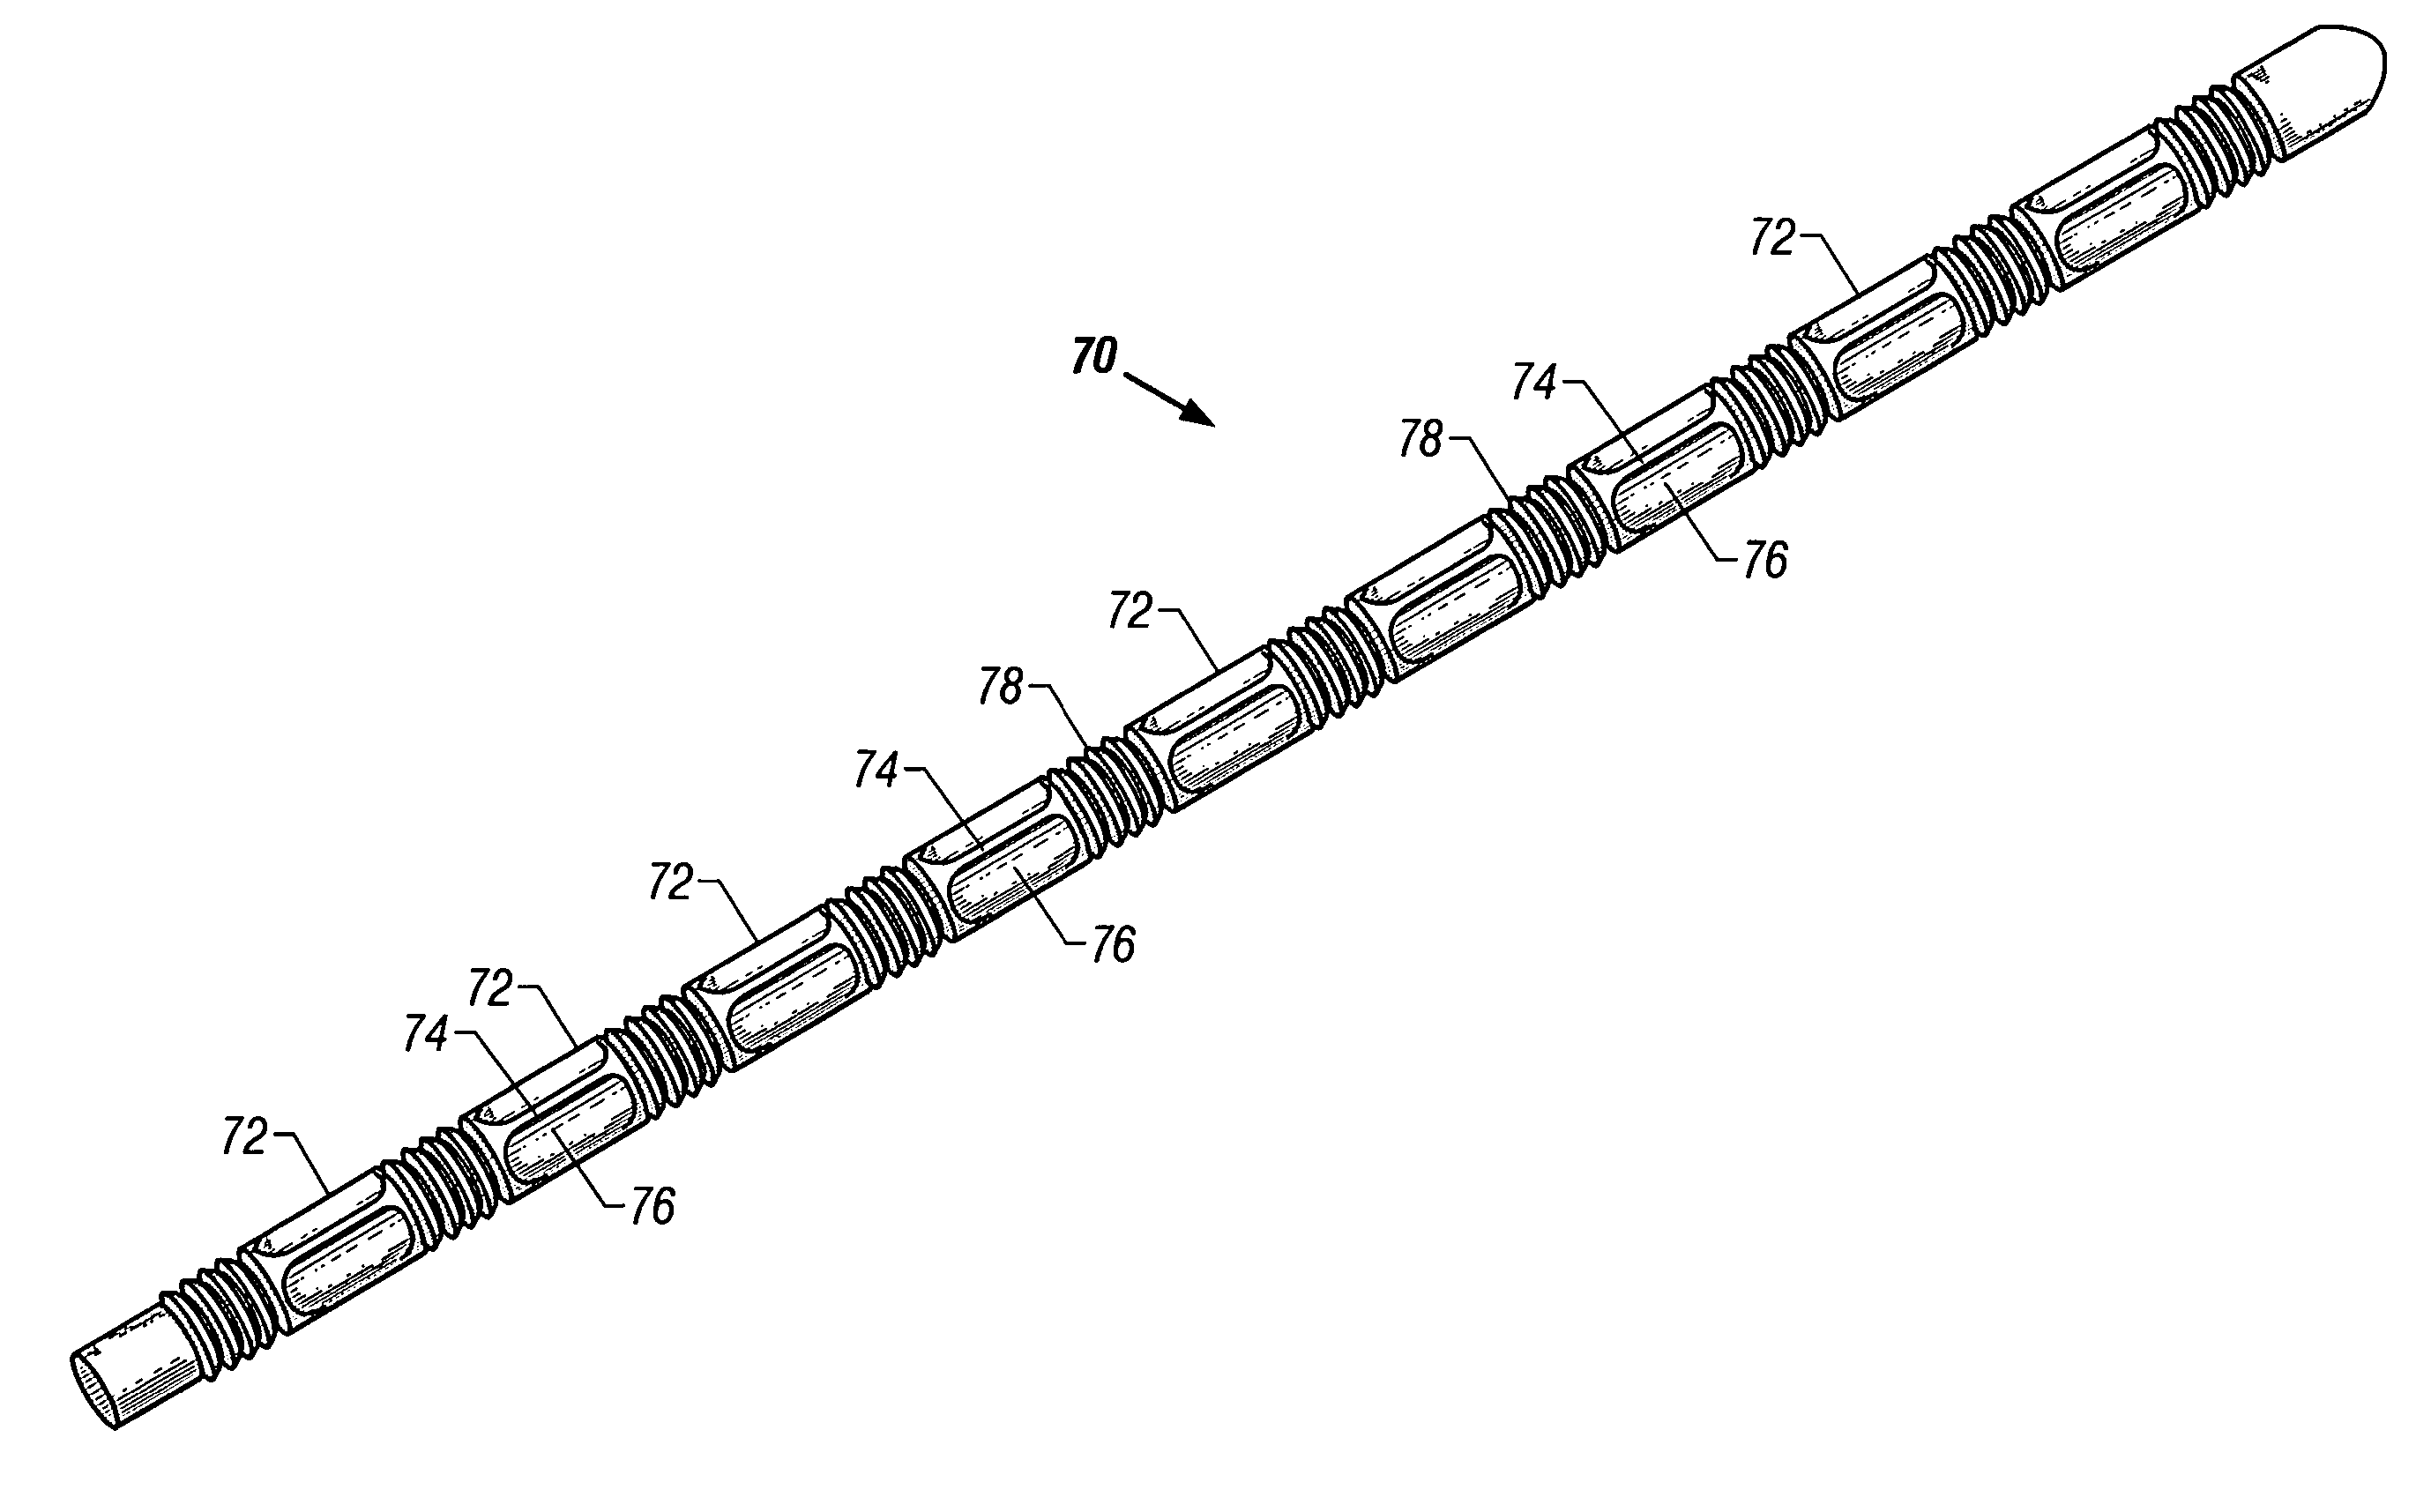 Selective organ cooling apparatus and method